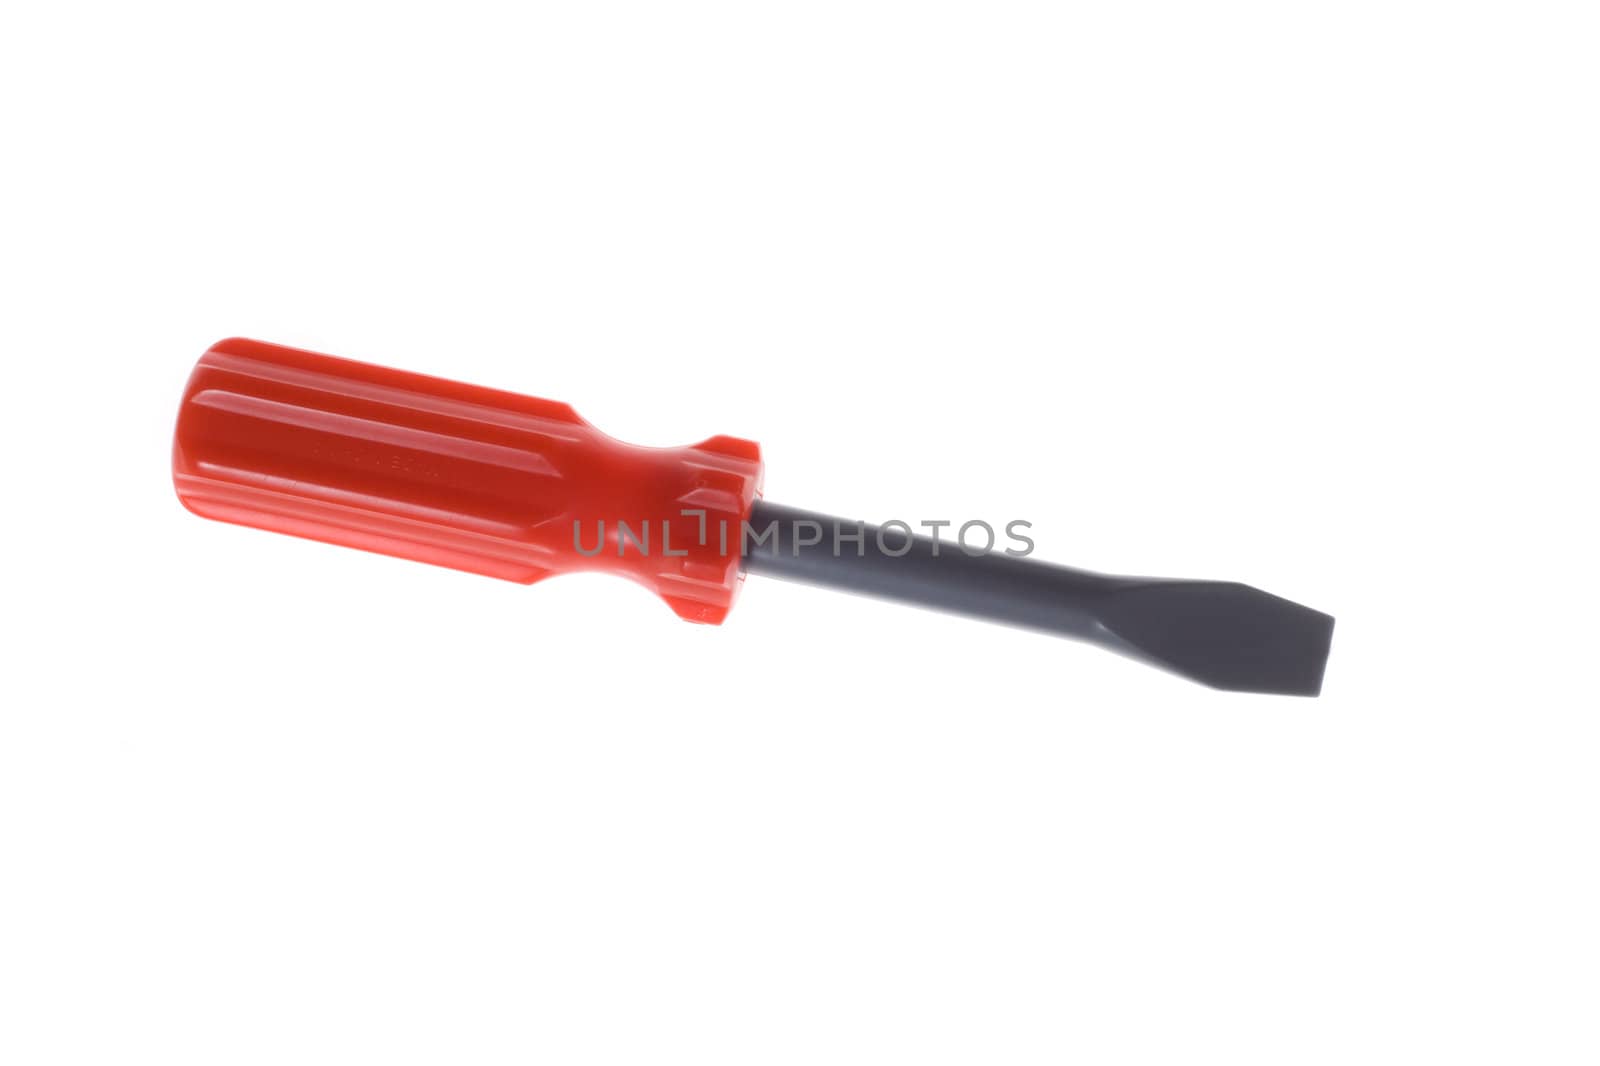 plastic screwdriver photo on the white background